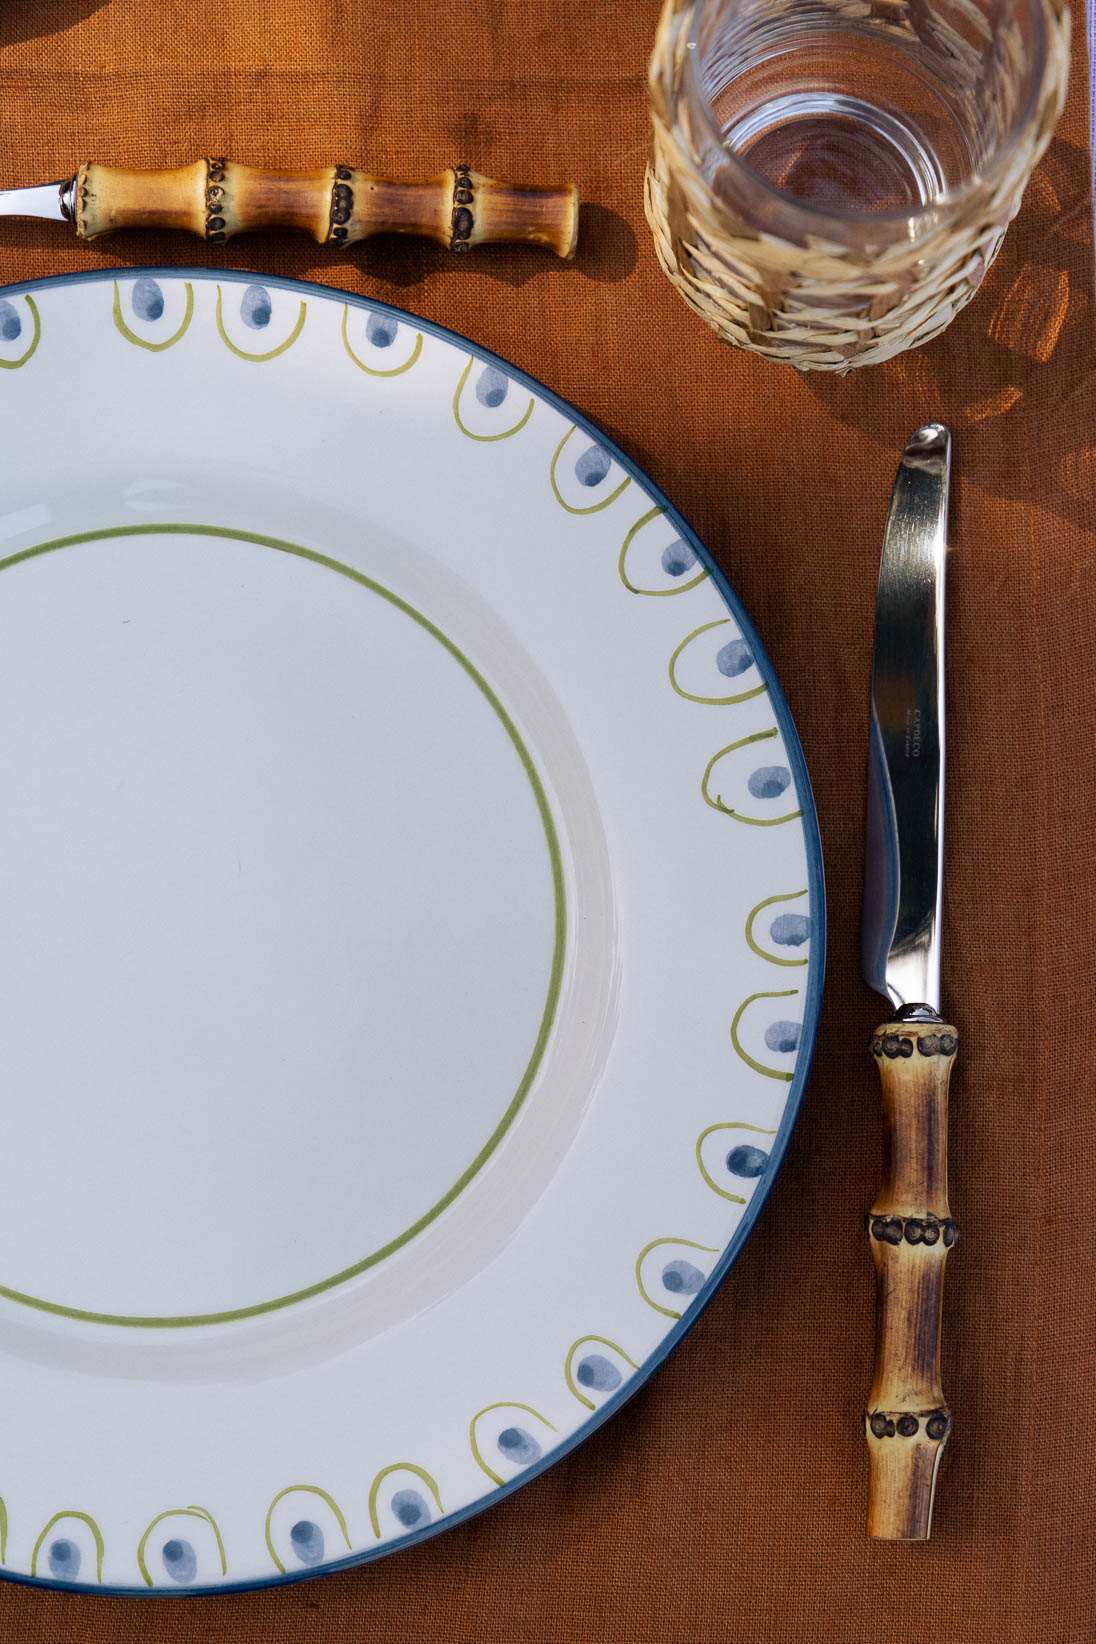 Coconut Hand-Painted Ceramic Dinner Plate - White, Green, and Blue - Matching with Bamboo Cutlery